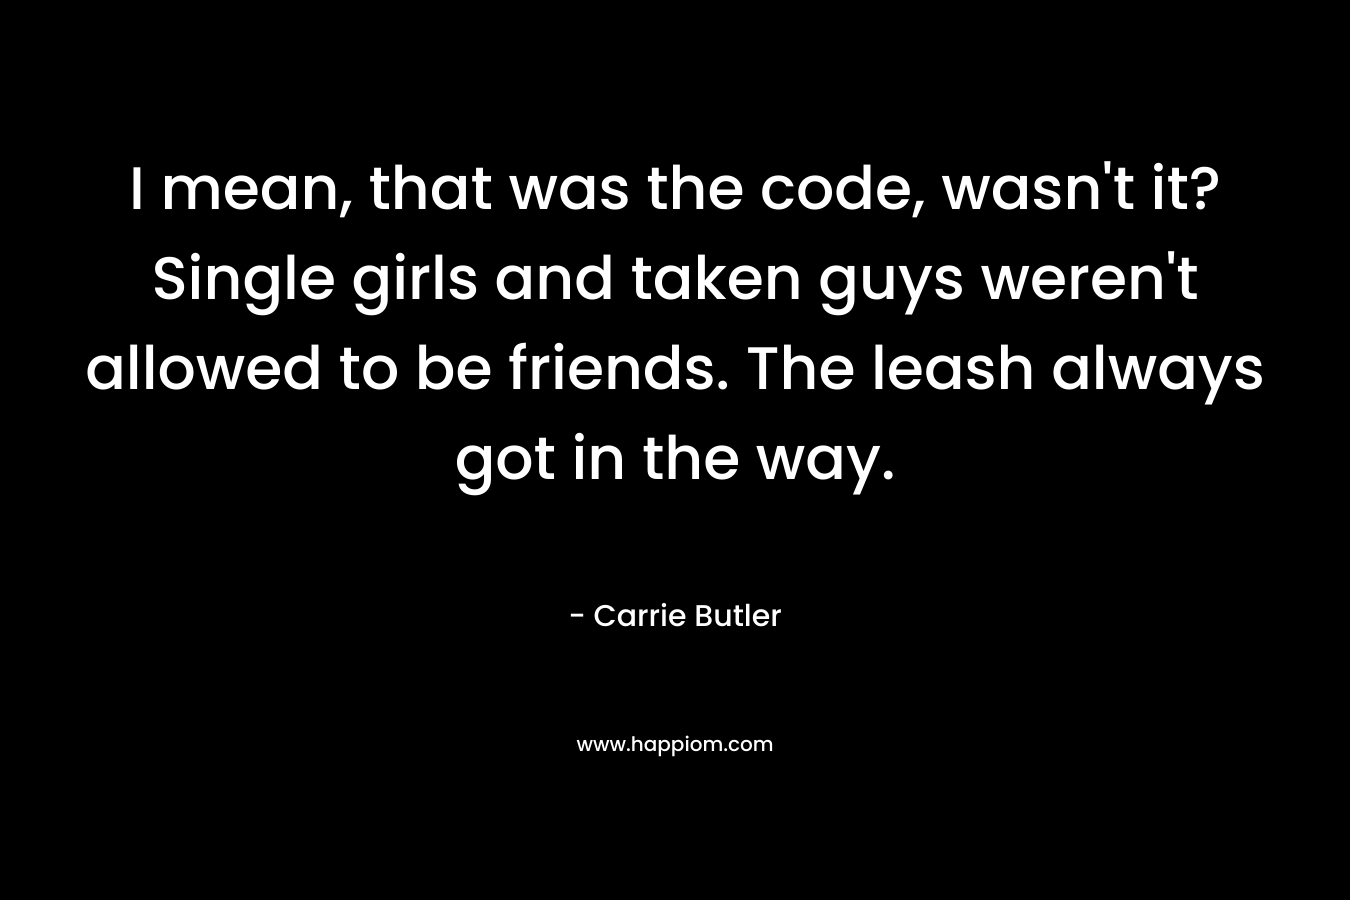 I mean, that was the code, wasn’t it? Single girls and taken guys weren’t allowed to be friends. The leash always got in the way. – Carrie Butler